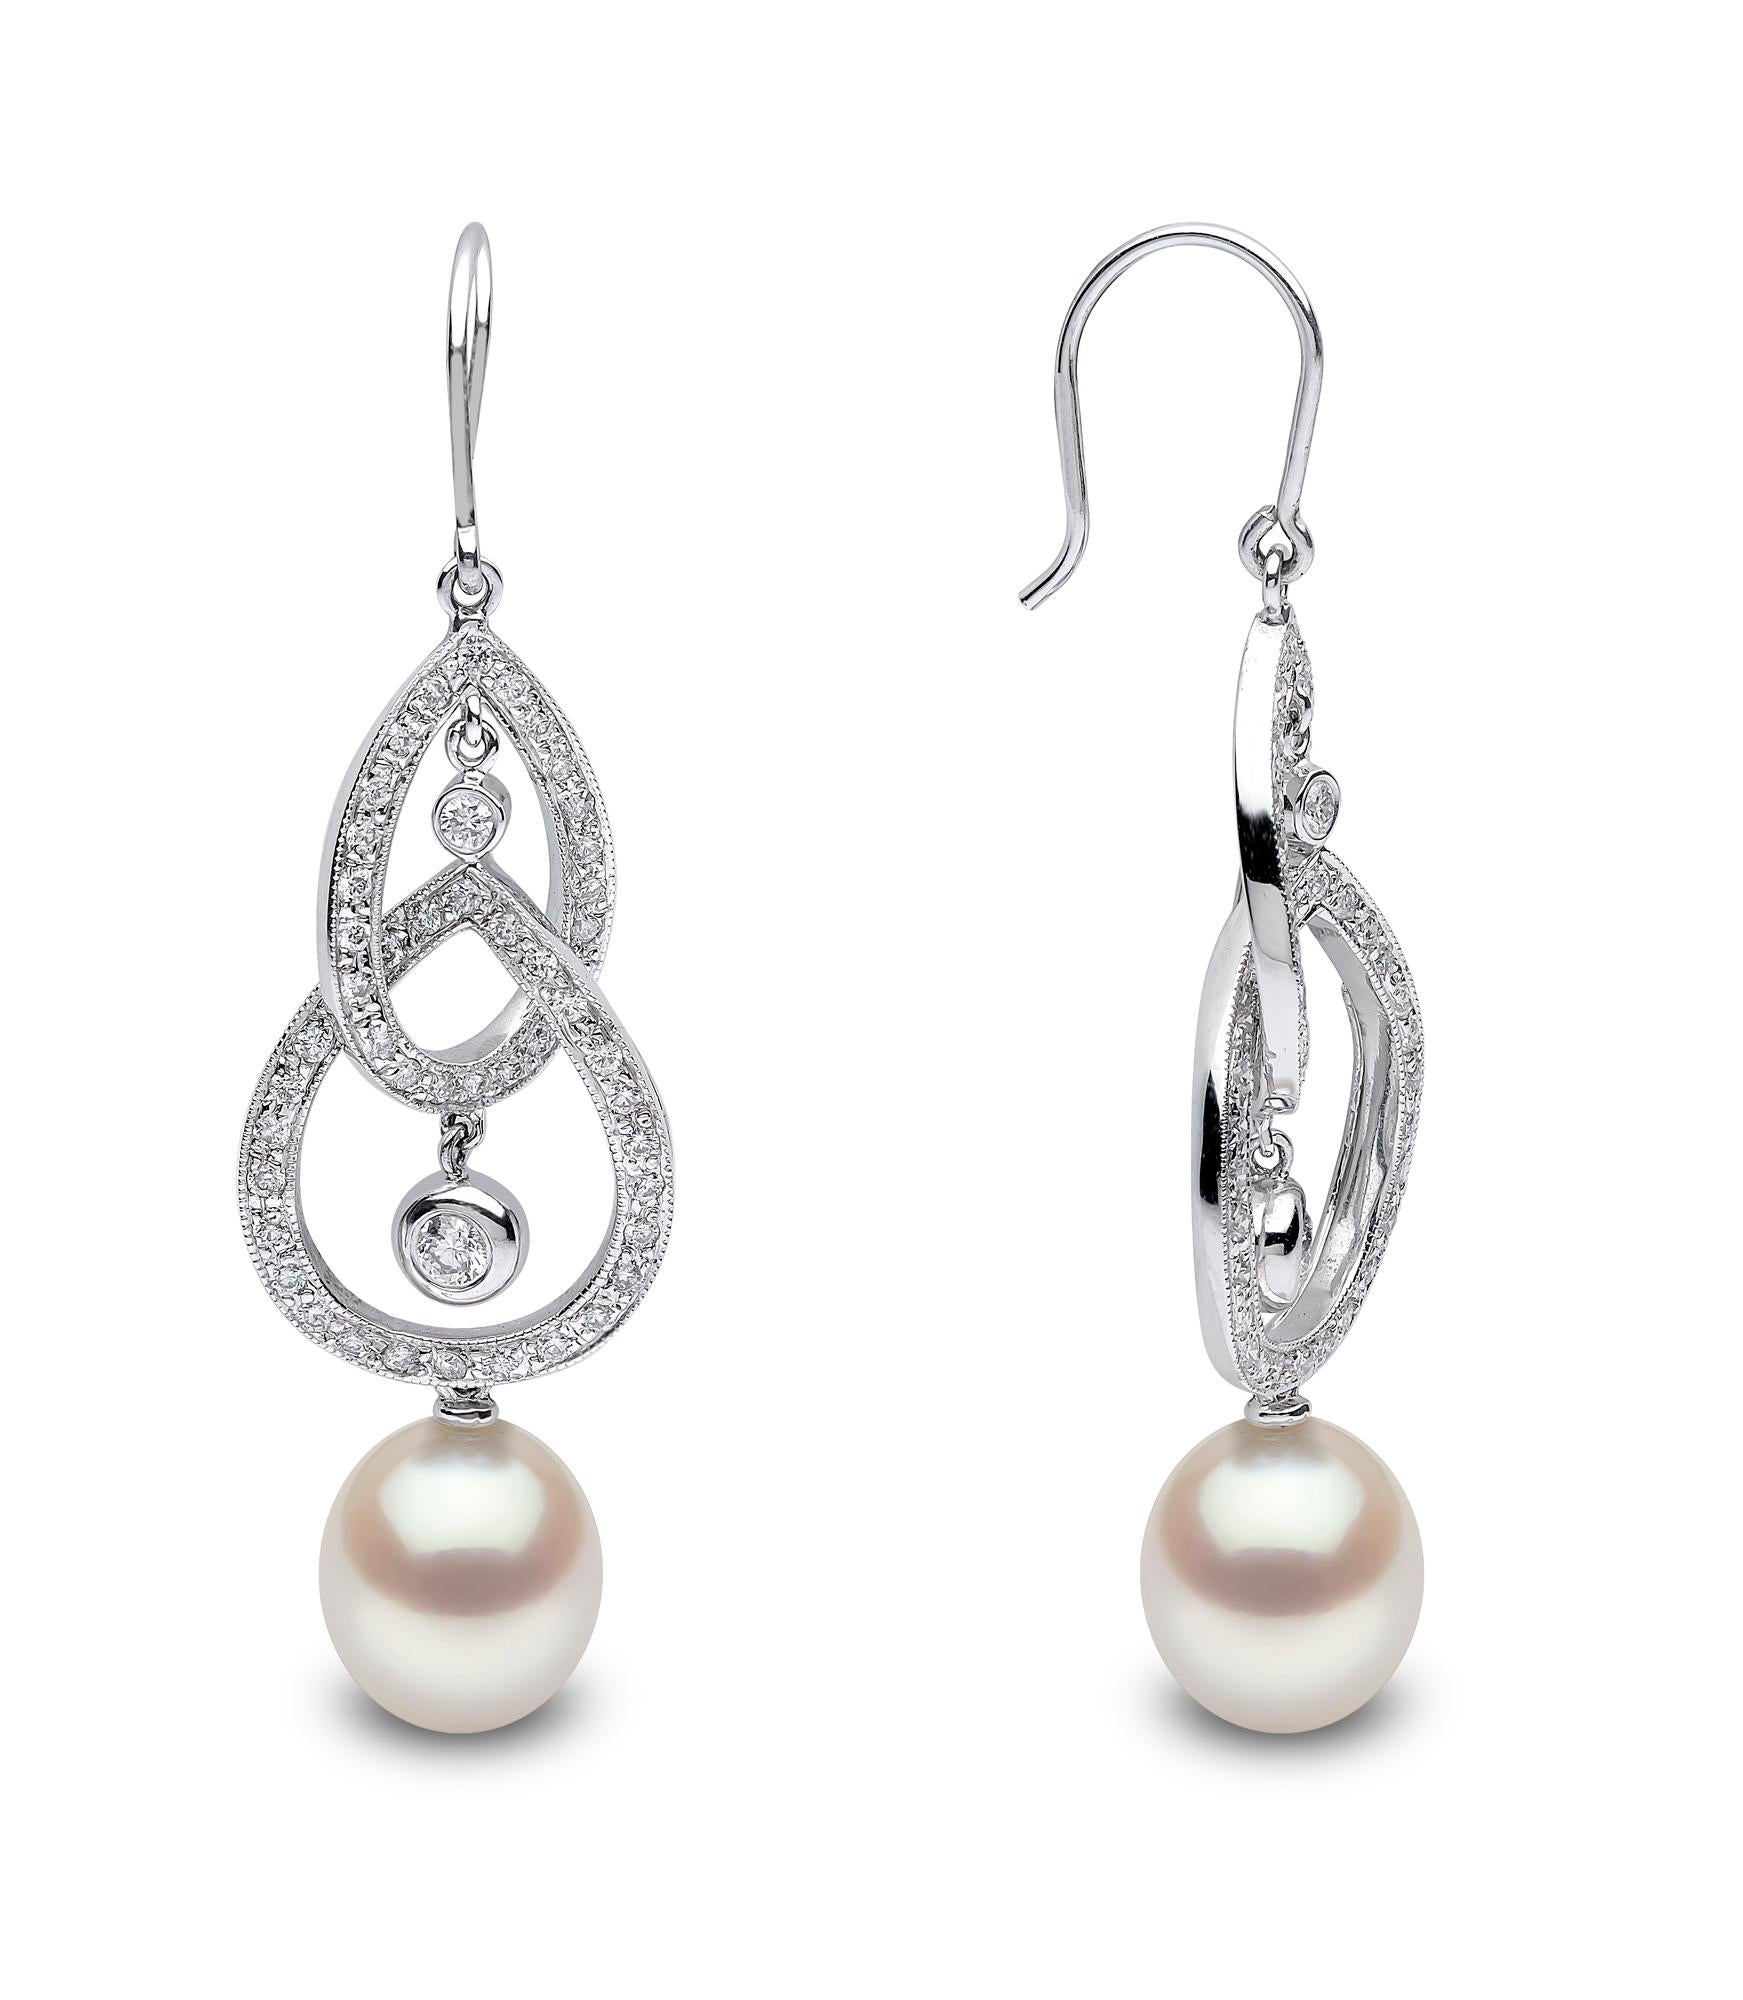 Featuring a stunning array of diamond swirls, atop a 9.5mm drop-shaped cultured freshwater pearl, these earrings are a delicate delight sure to add a feeling of glamour to any outfit. Made with a hook earring fitting, these earrings are easy to put